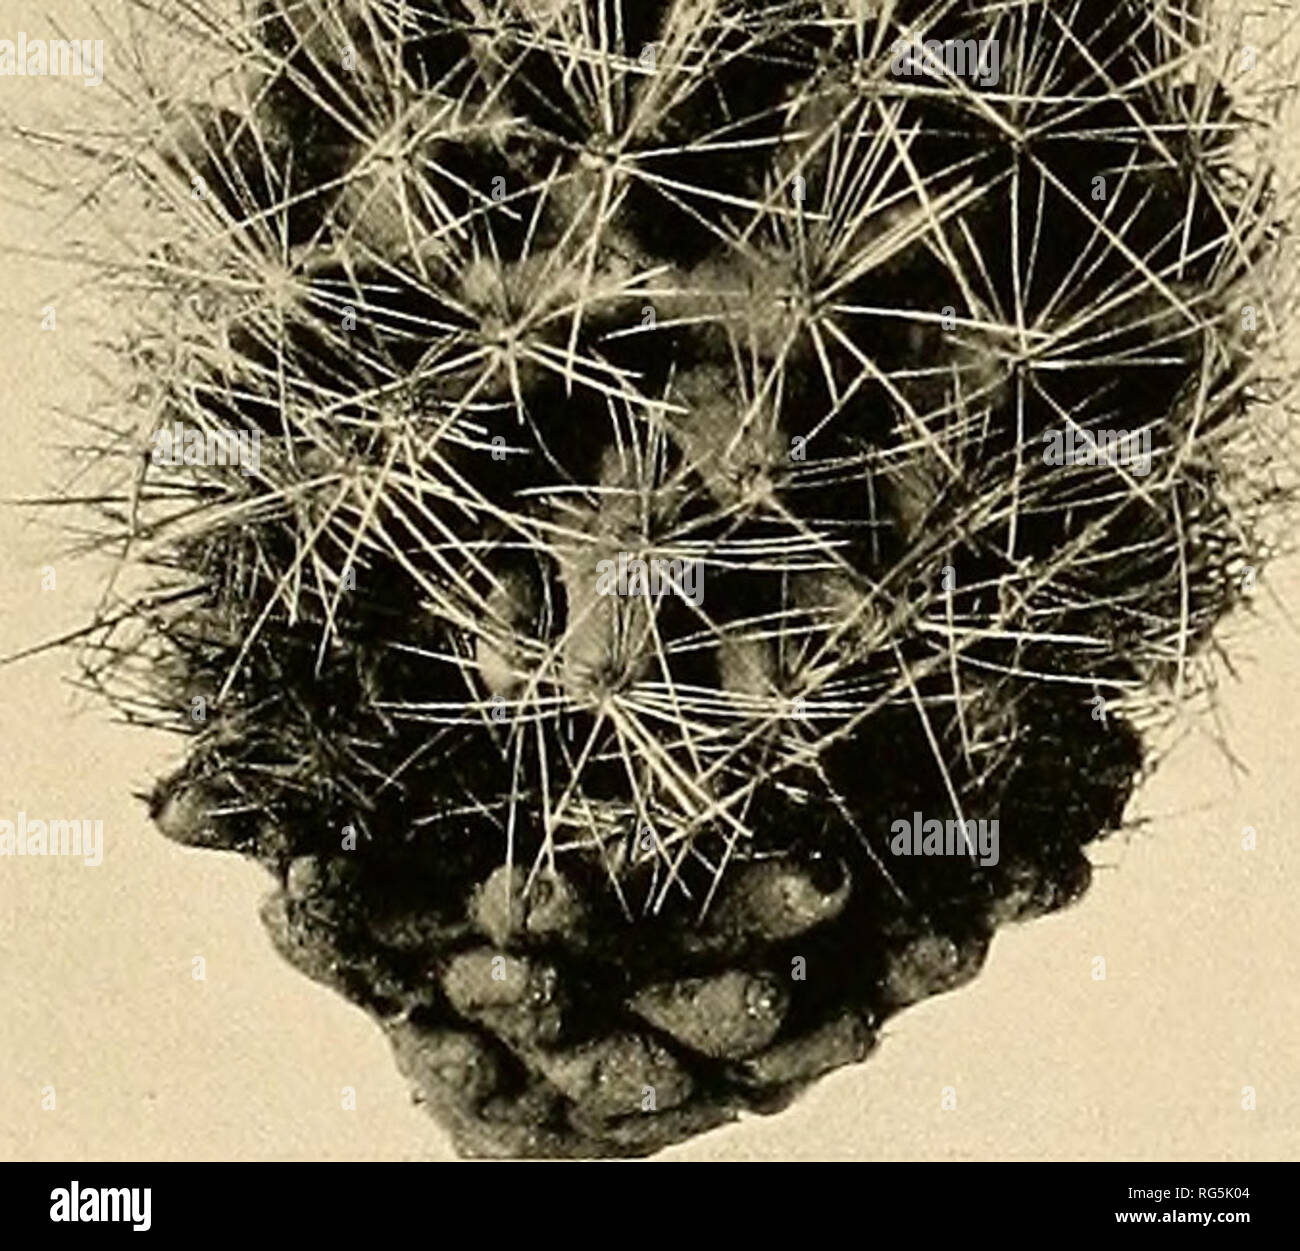 . The Cactaceae : descriptions and illustrations of plants of the cactus family. CORYPHANTHA. 29 There has been considerable confusion regarding this species, which was first described as Mammillaria scheeri by Miihlenpfordt in 1847, but this proved to be a homonym. This led Poselger in 1853, when he transferred the species to Echinocactus, to publish it as E. muehlenpfordtii. Dr. Engelmann in 1856 described a variety of Mammillaria scheeri, calling it valida. Some time afterwards he compared this variety with the type of the species and decided that they were the same. We have examined severa Stock Photo